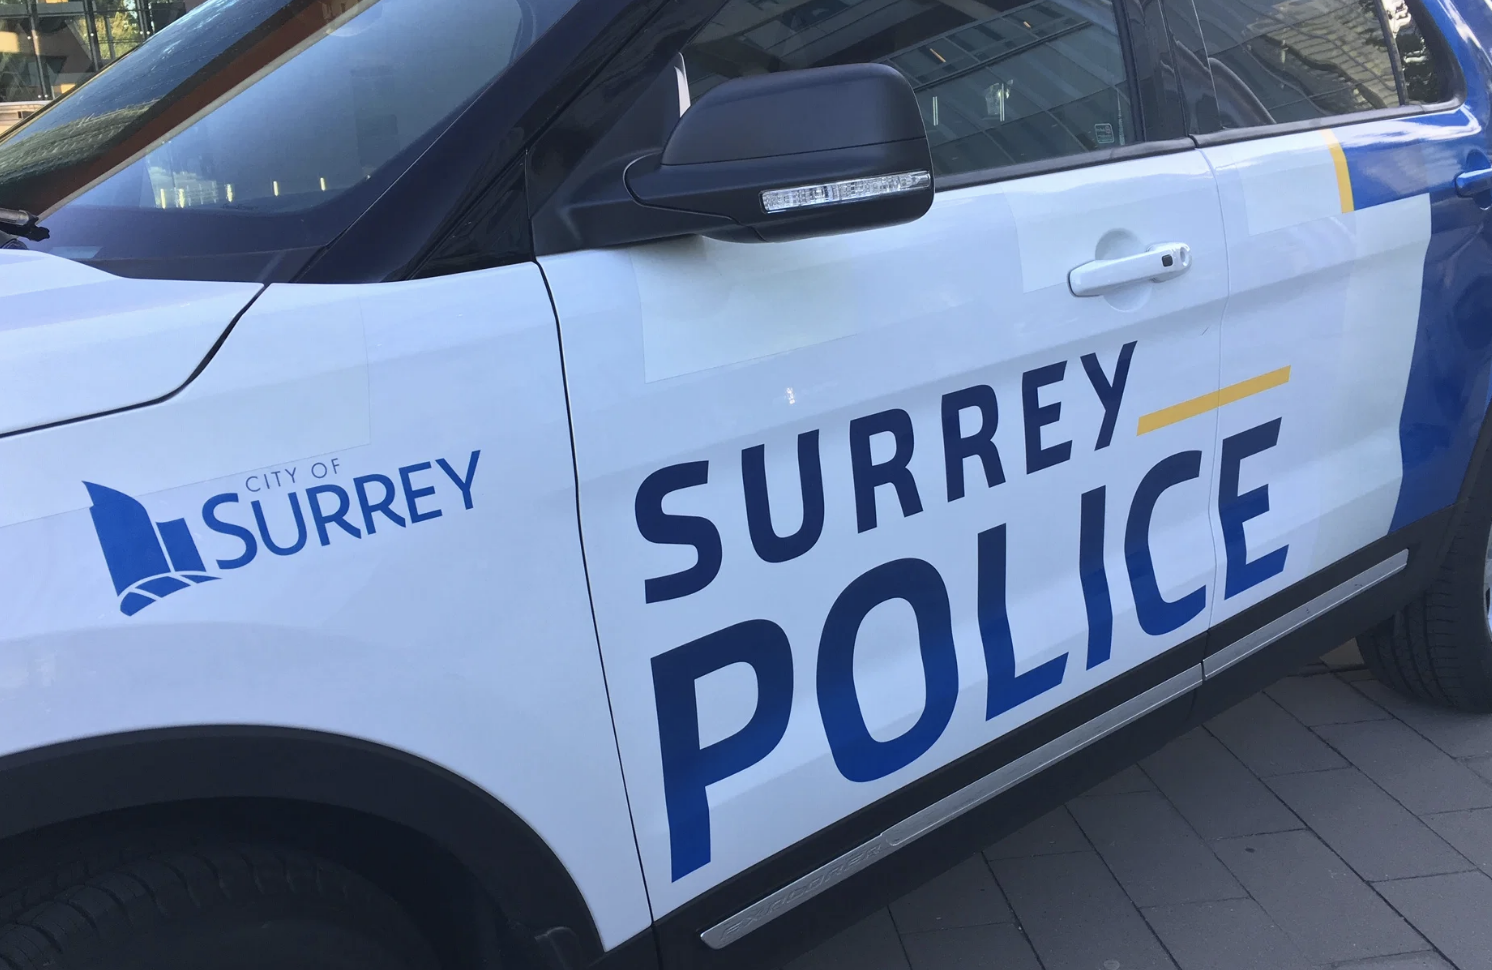 Petition Approved for a Referendum vote on Surrey Police